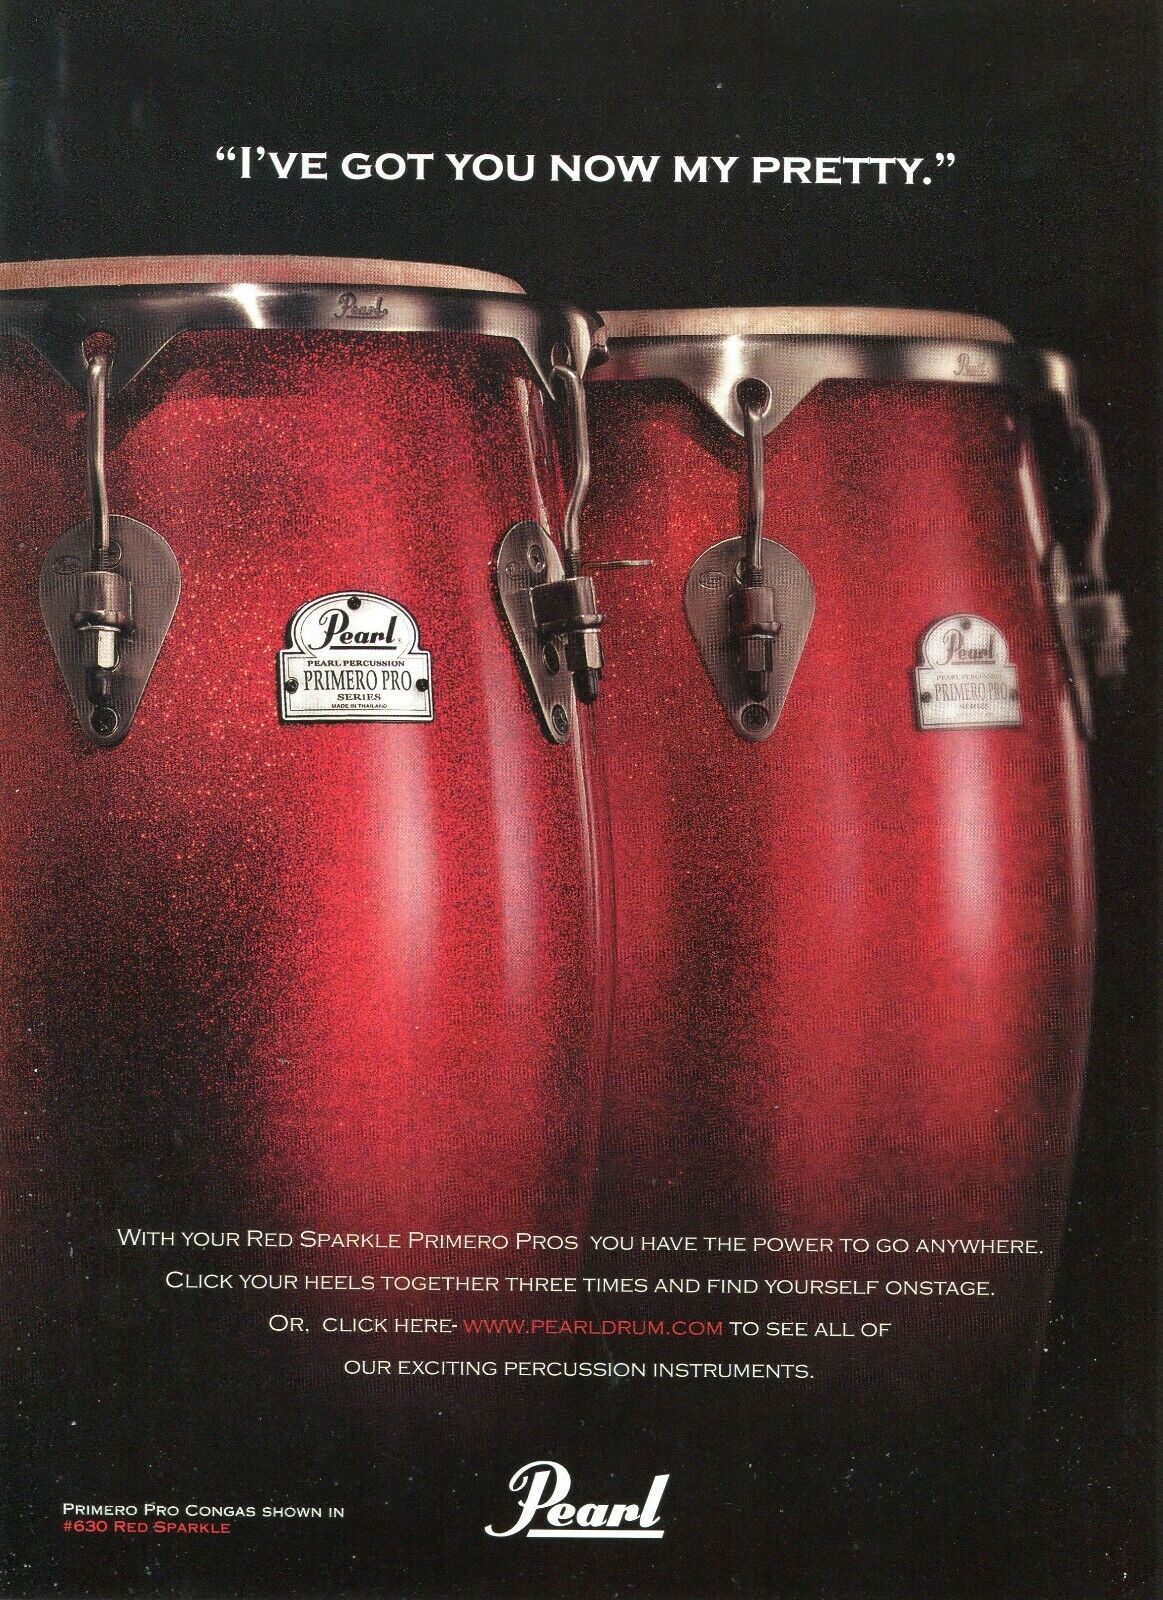 2005 Print Ad of Pearl Primero Red Sparkle Pro Congas I\'ve got you now my pretty